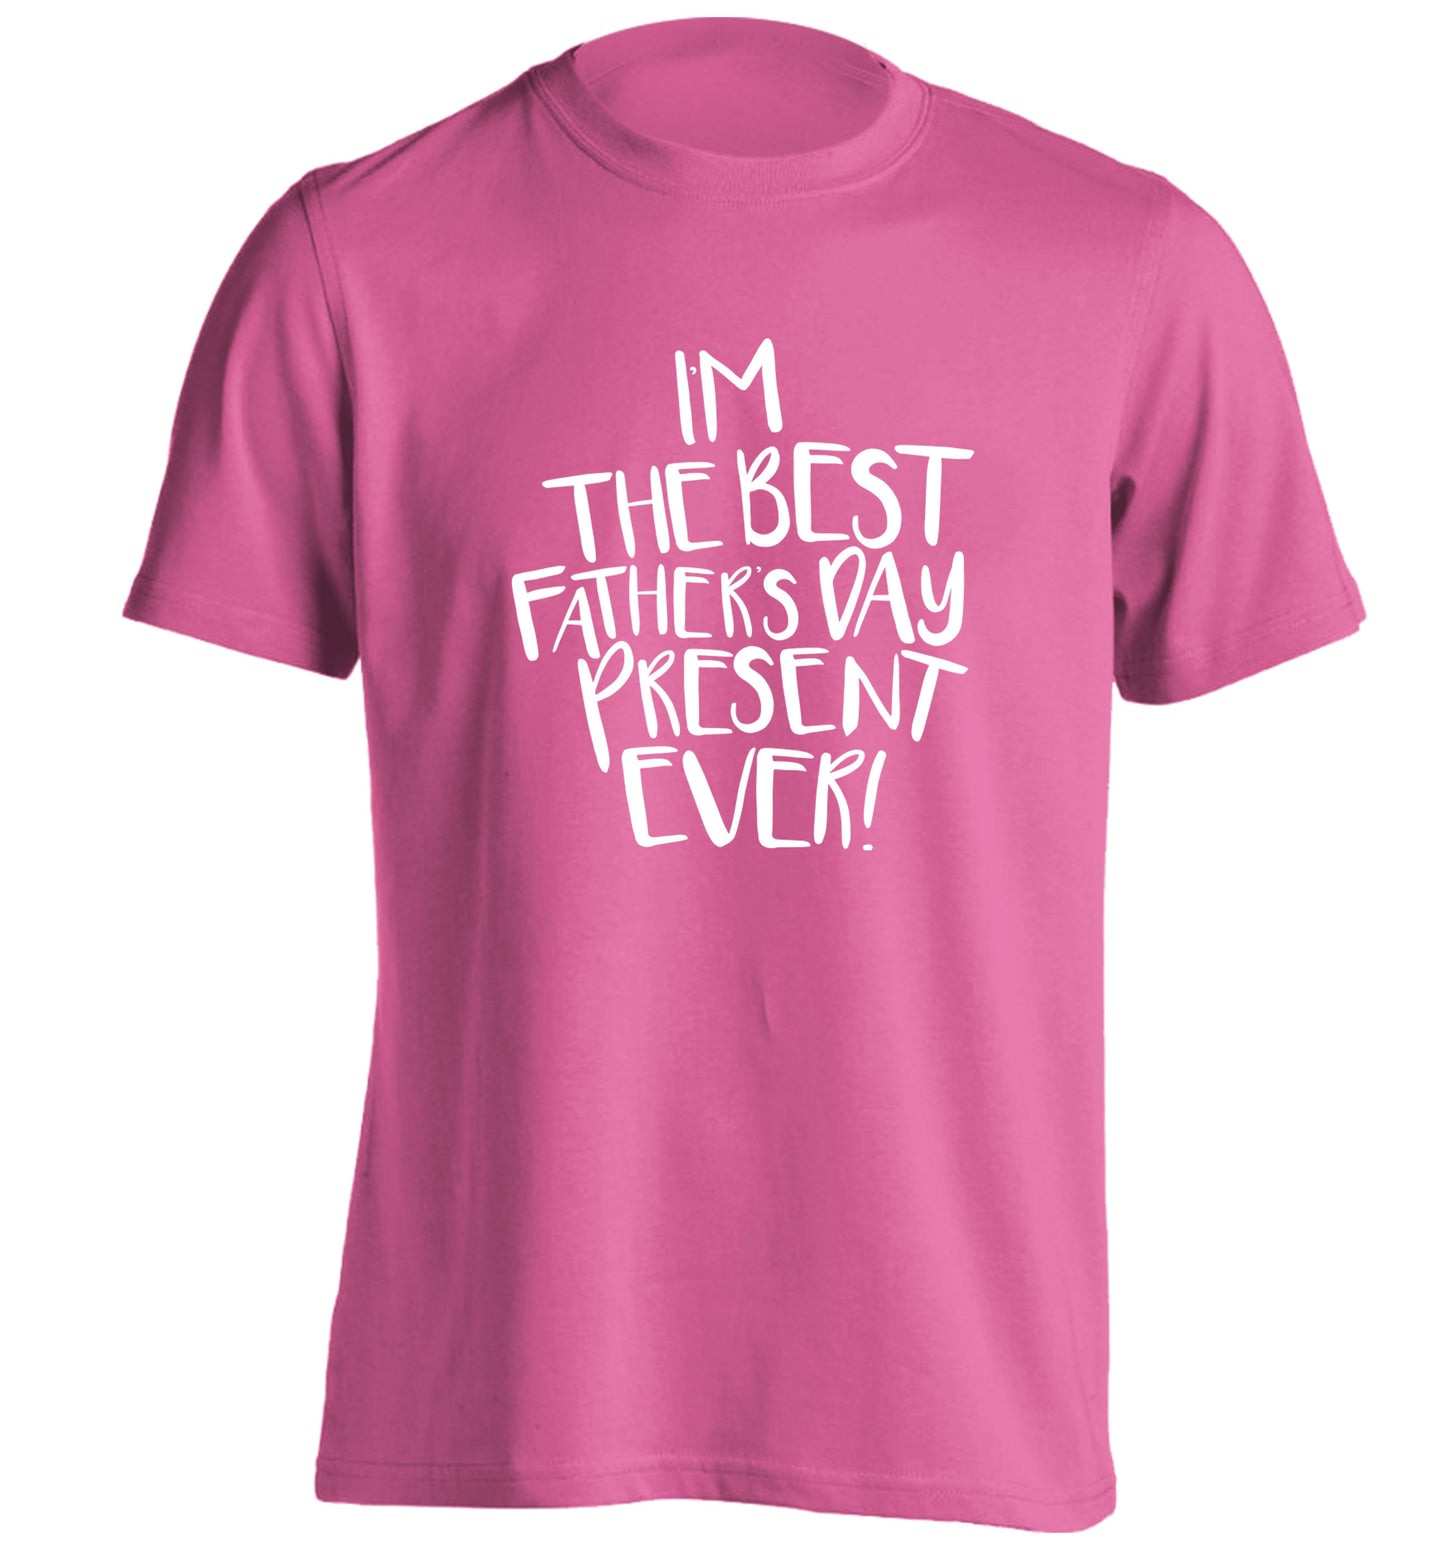 I'm the best father's day present ever! adults unisex pink Tshirt 2XL